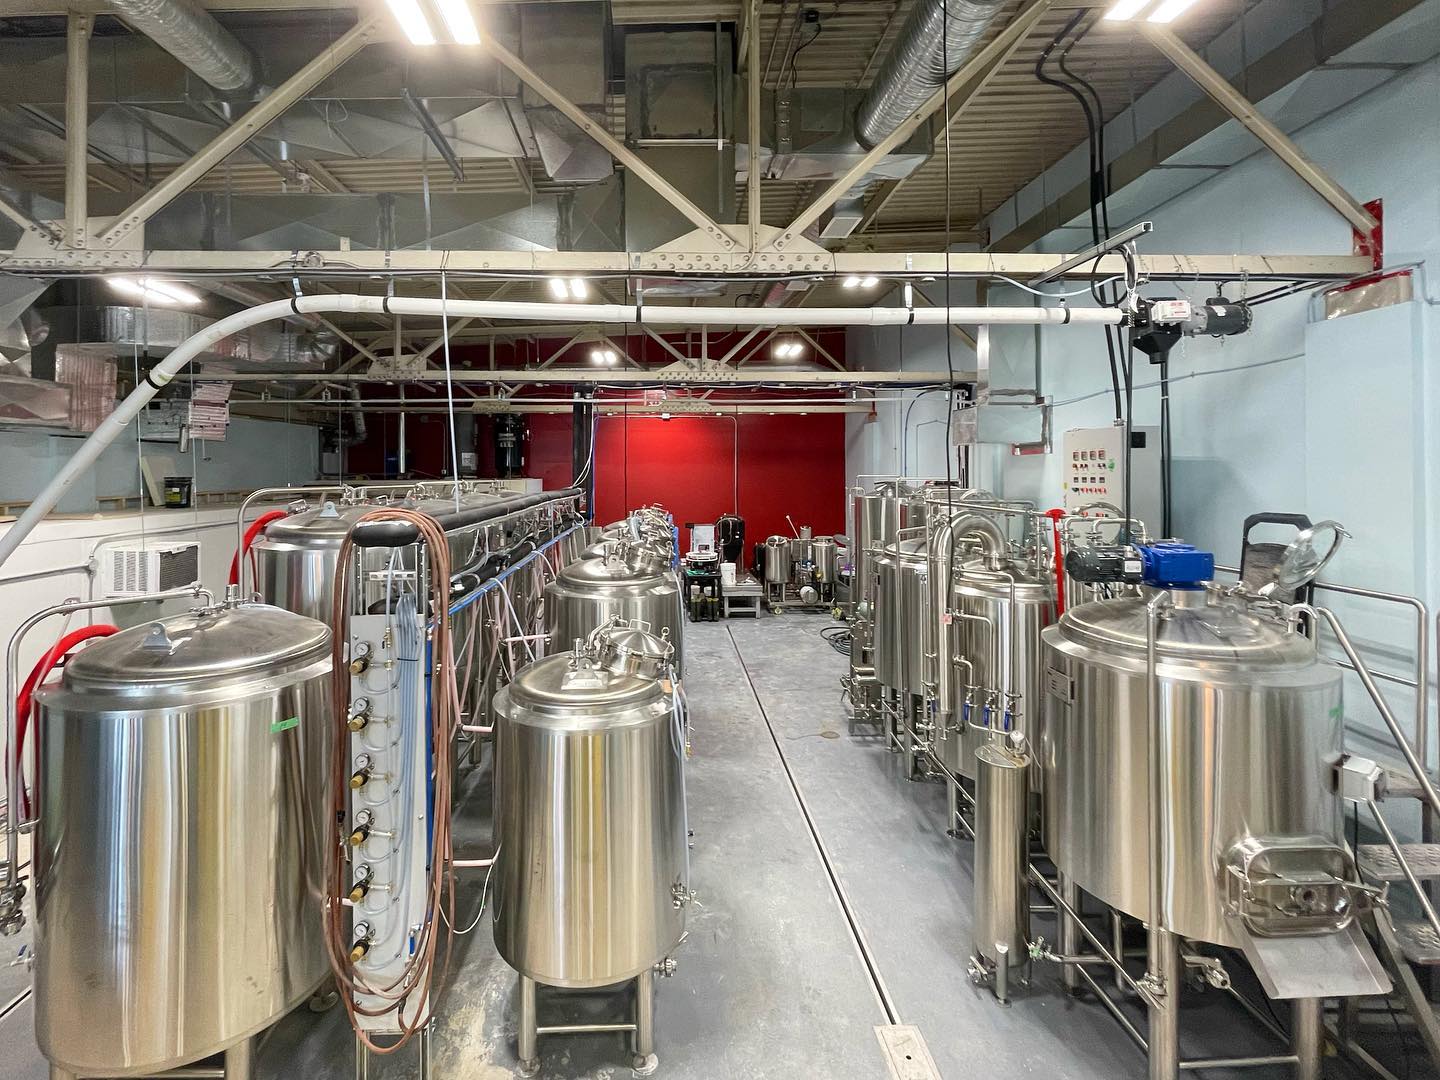 What is the difference between glycol water tanks and cold water tanks in a brewery?